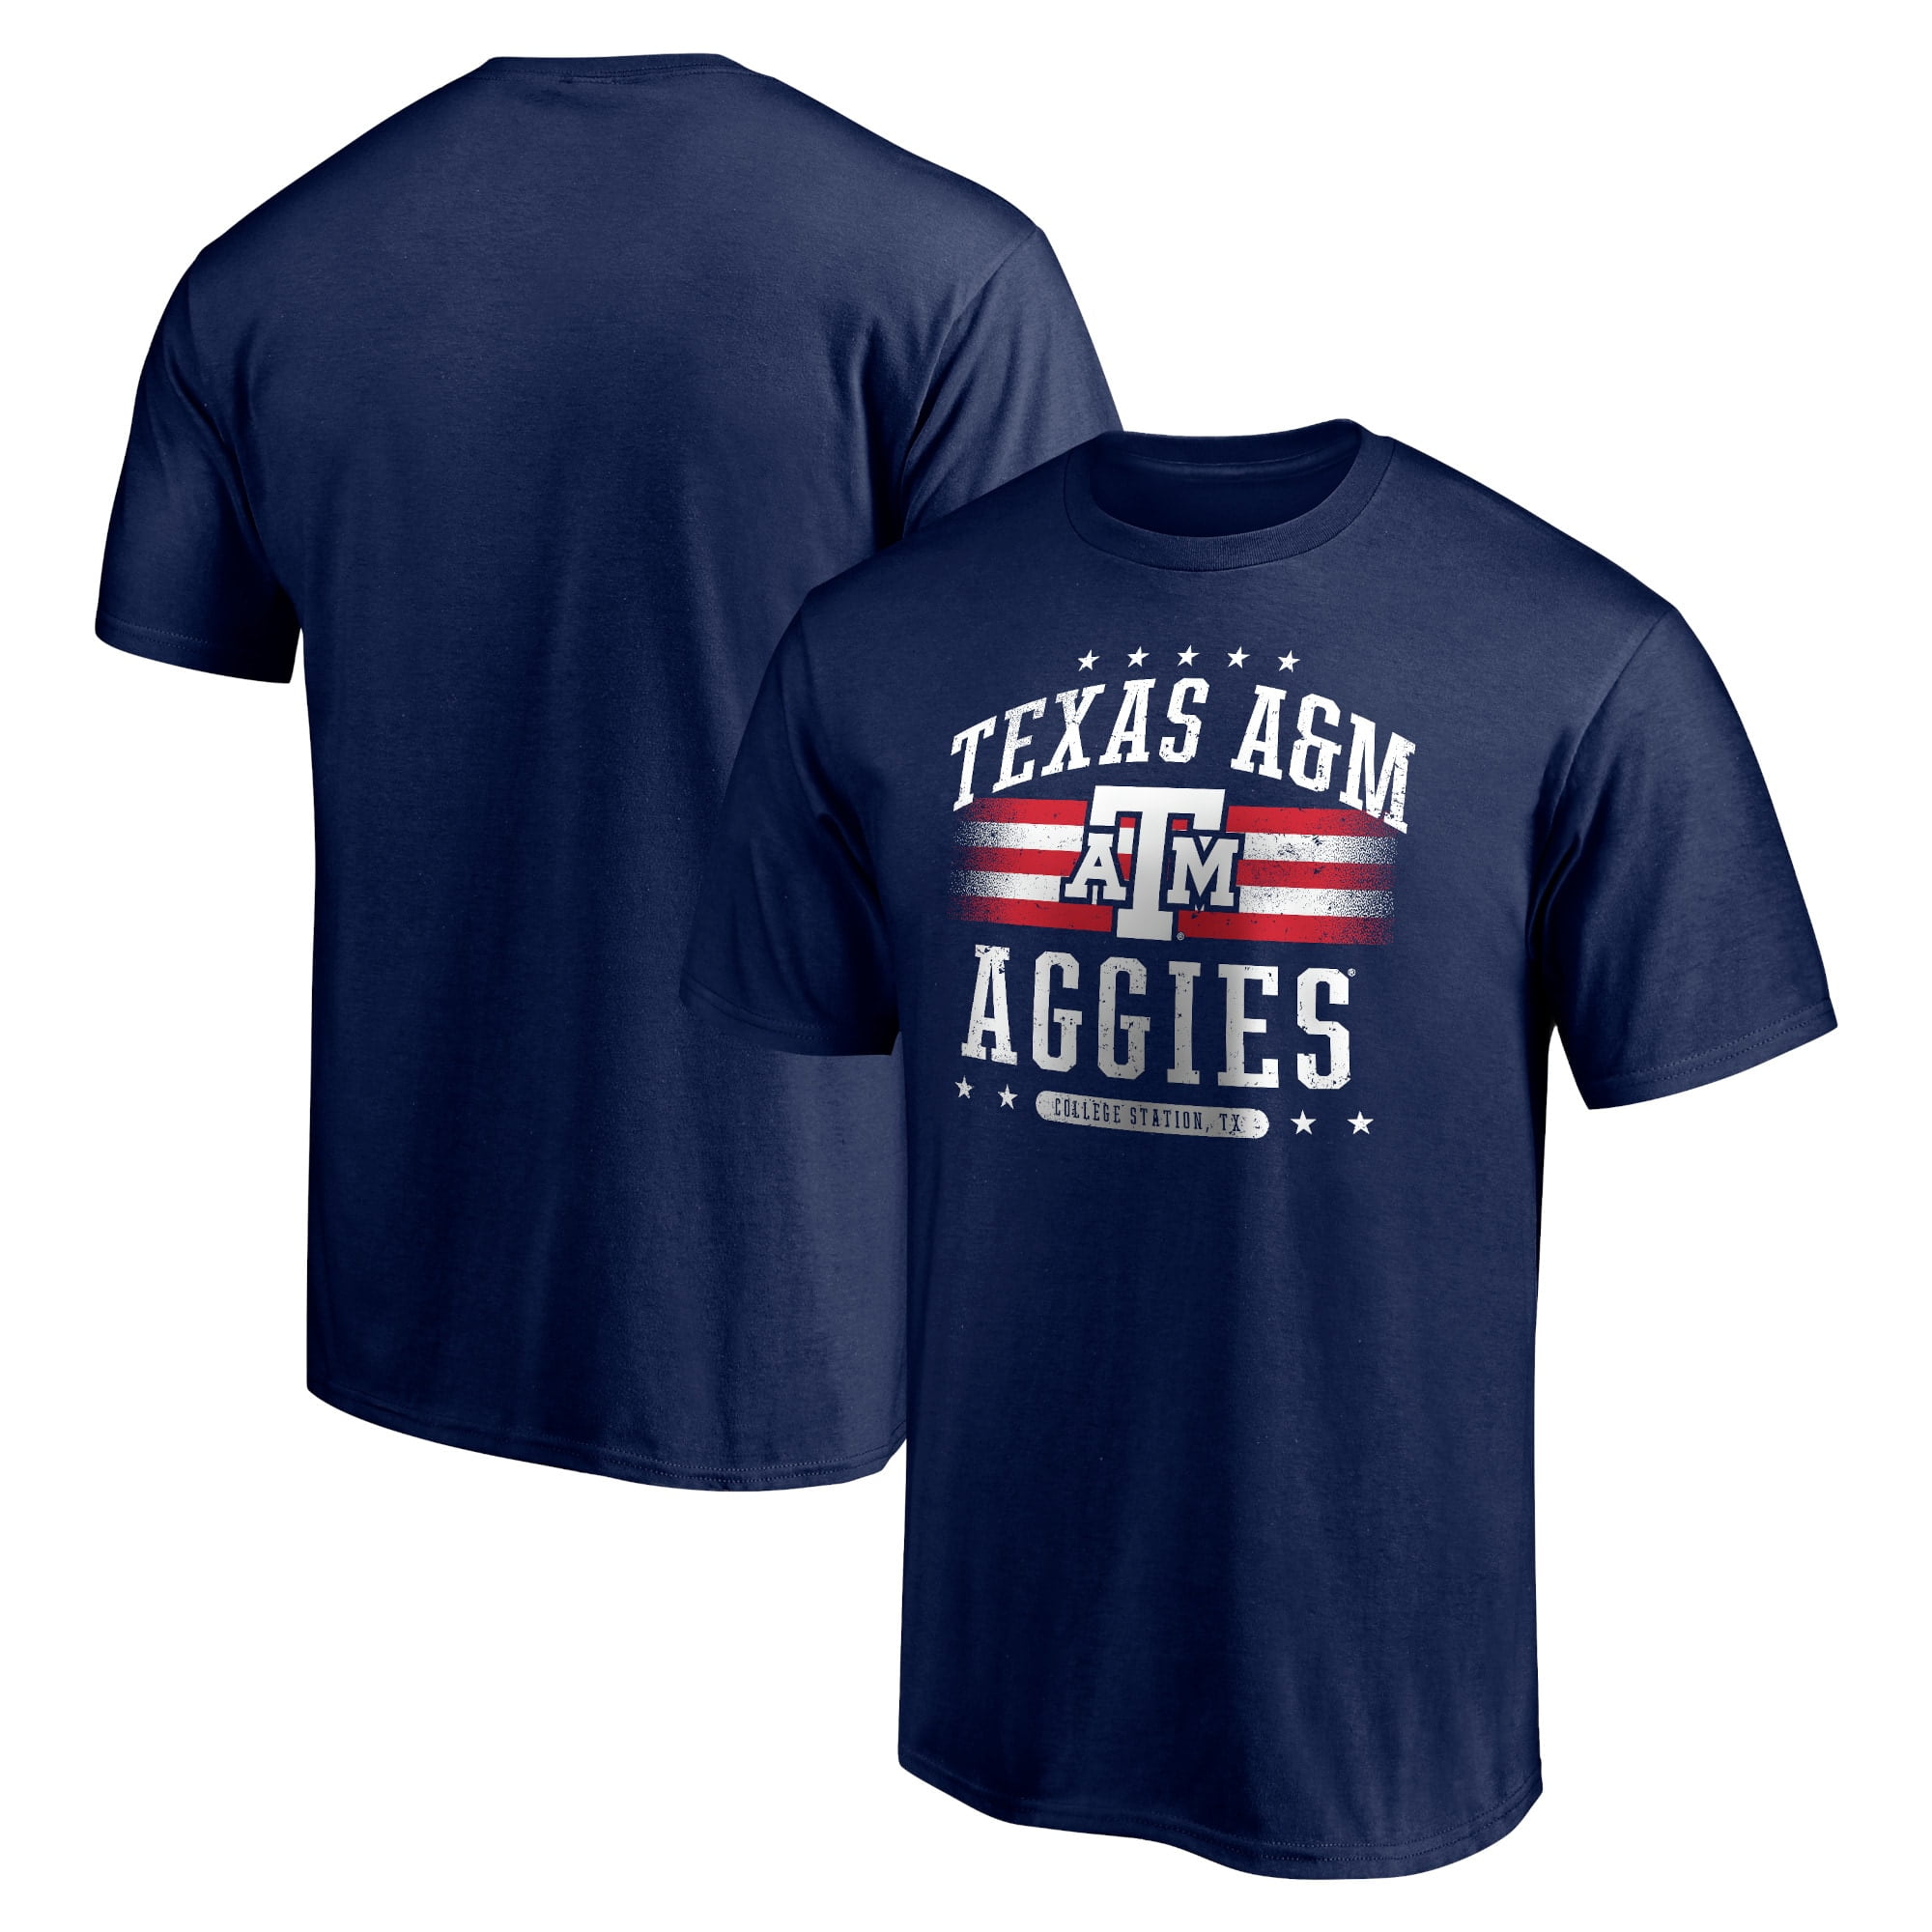 New Texas A&M Aggies Men's 100% Polyester T-shirt Gray Tee Shirt Adult Sizes 